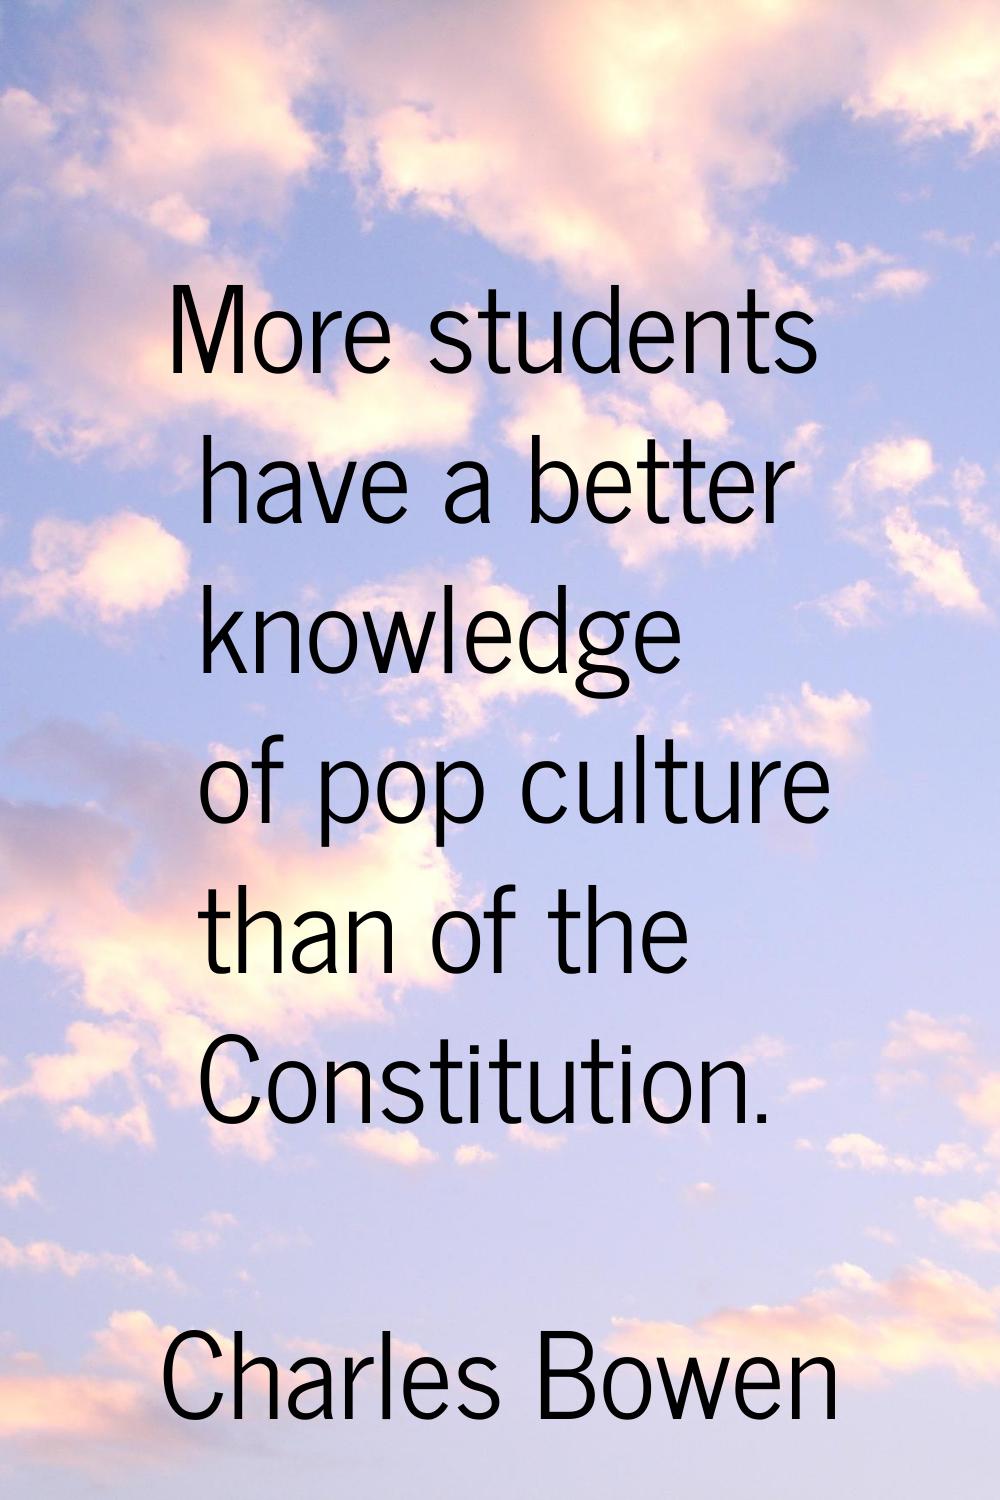 More students have a better knowledge of pop culture than of the Constitution.